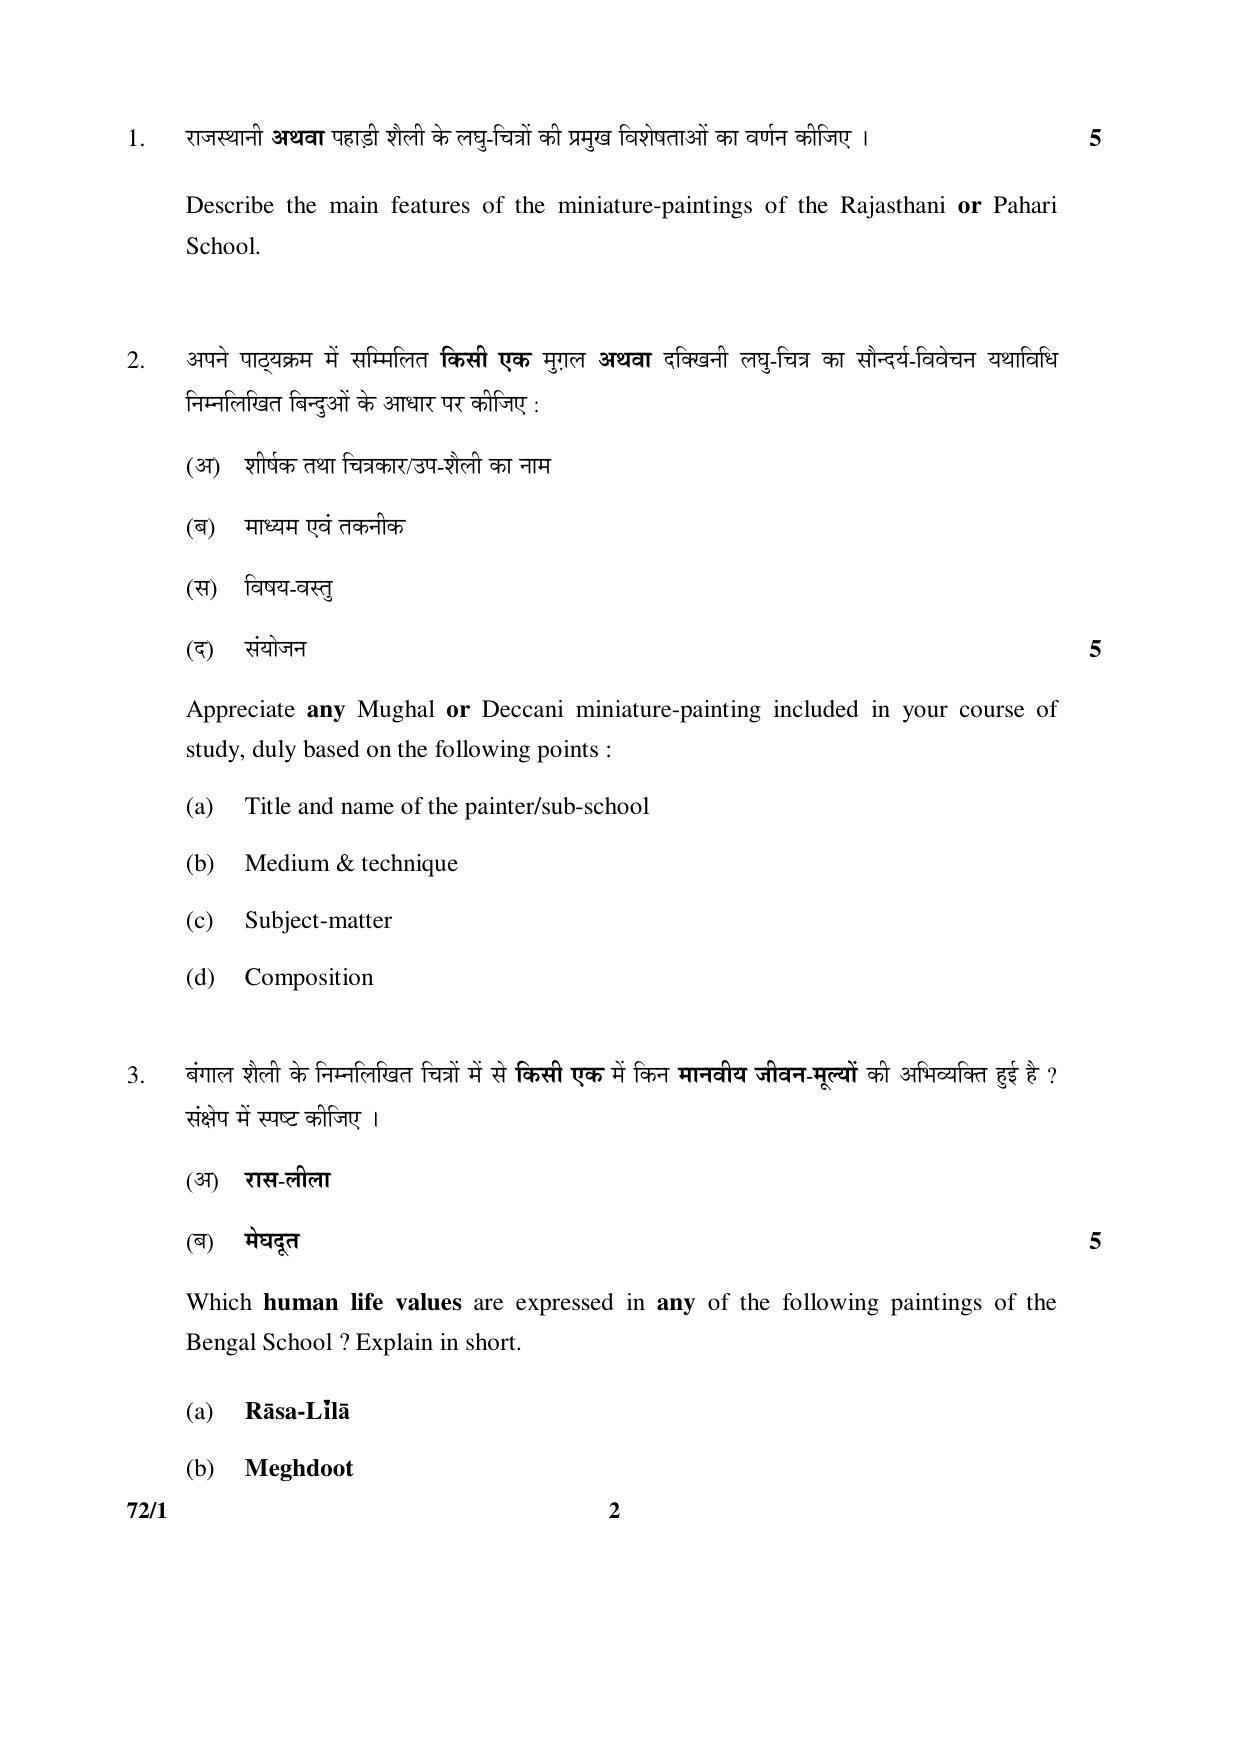 CBSE Class 12 72-1 COMMERCIAL ART (Theory) 2016 Question Paper - Page 2